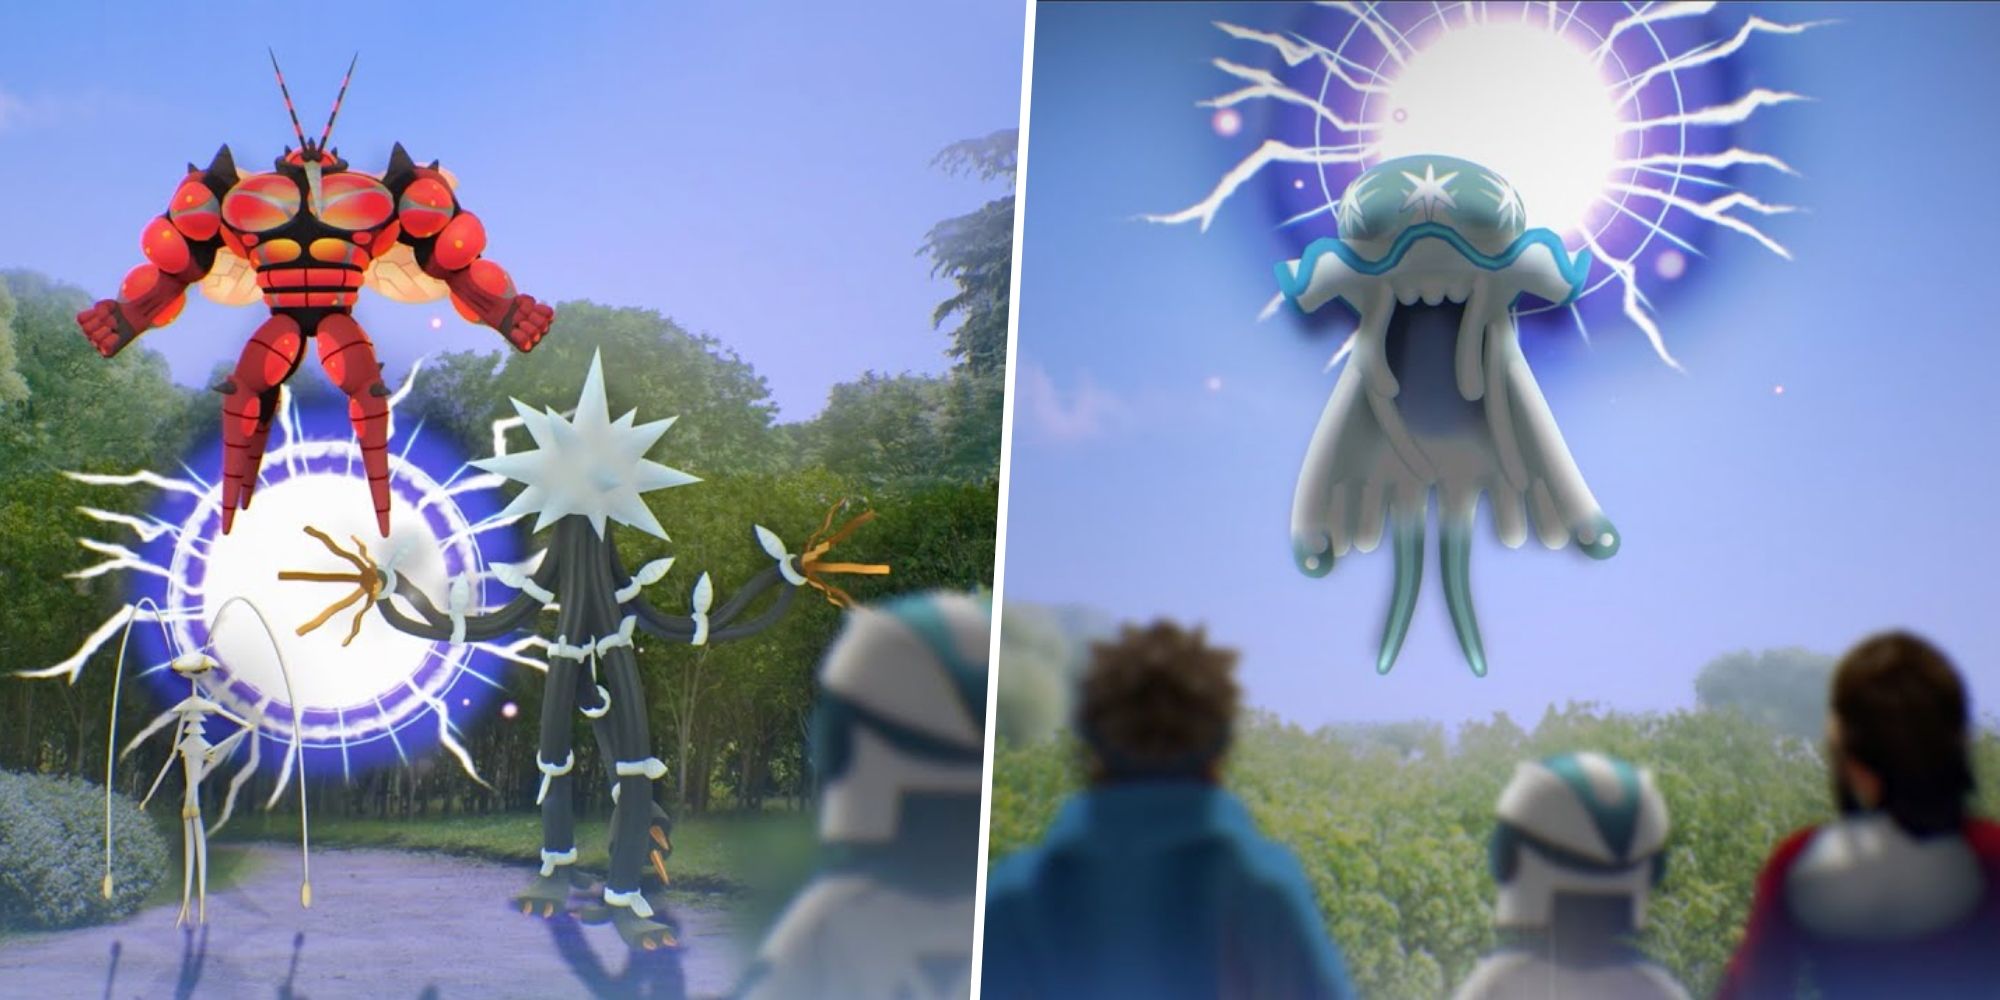 Nihilego Is Coming: Pokémon GO Teases The Arrival Of Ultra Beasts